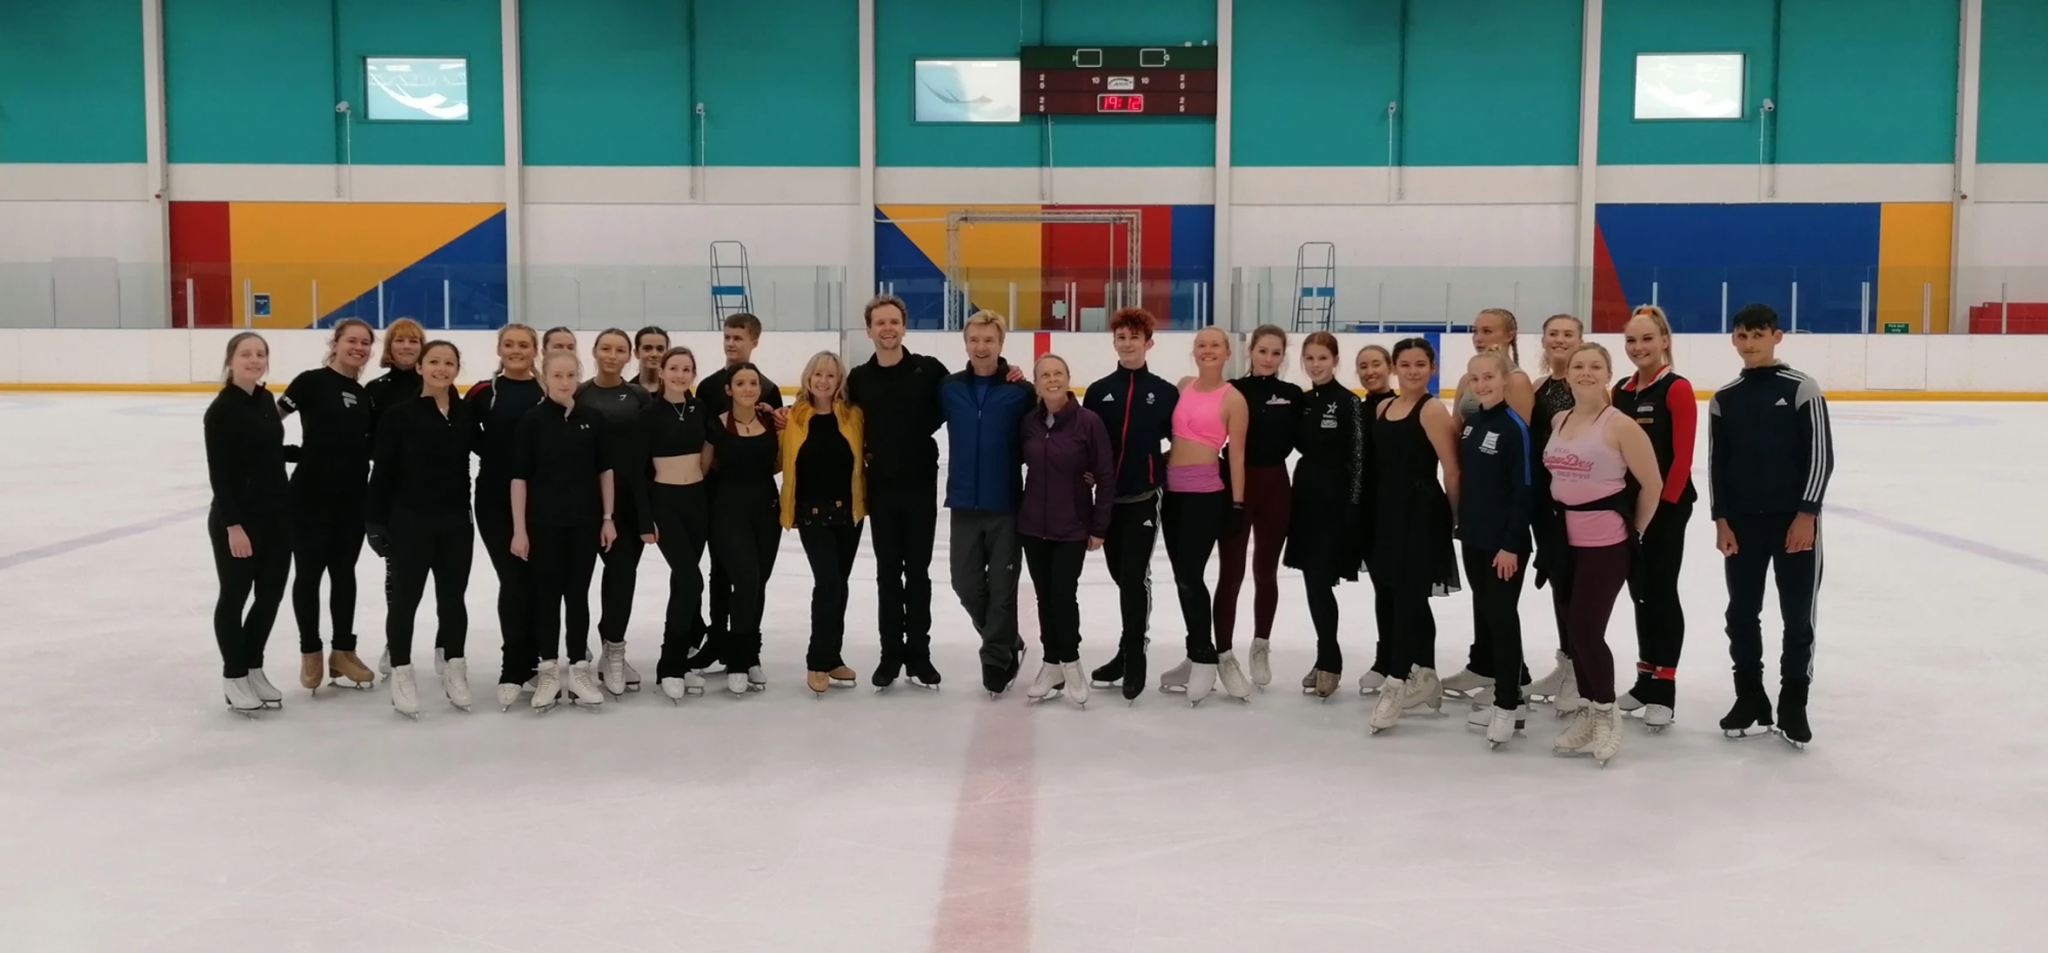 Torvill and Dean lead more than 80 skaters in first weekend of British Ice Skating Academy of Dance